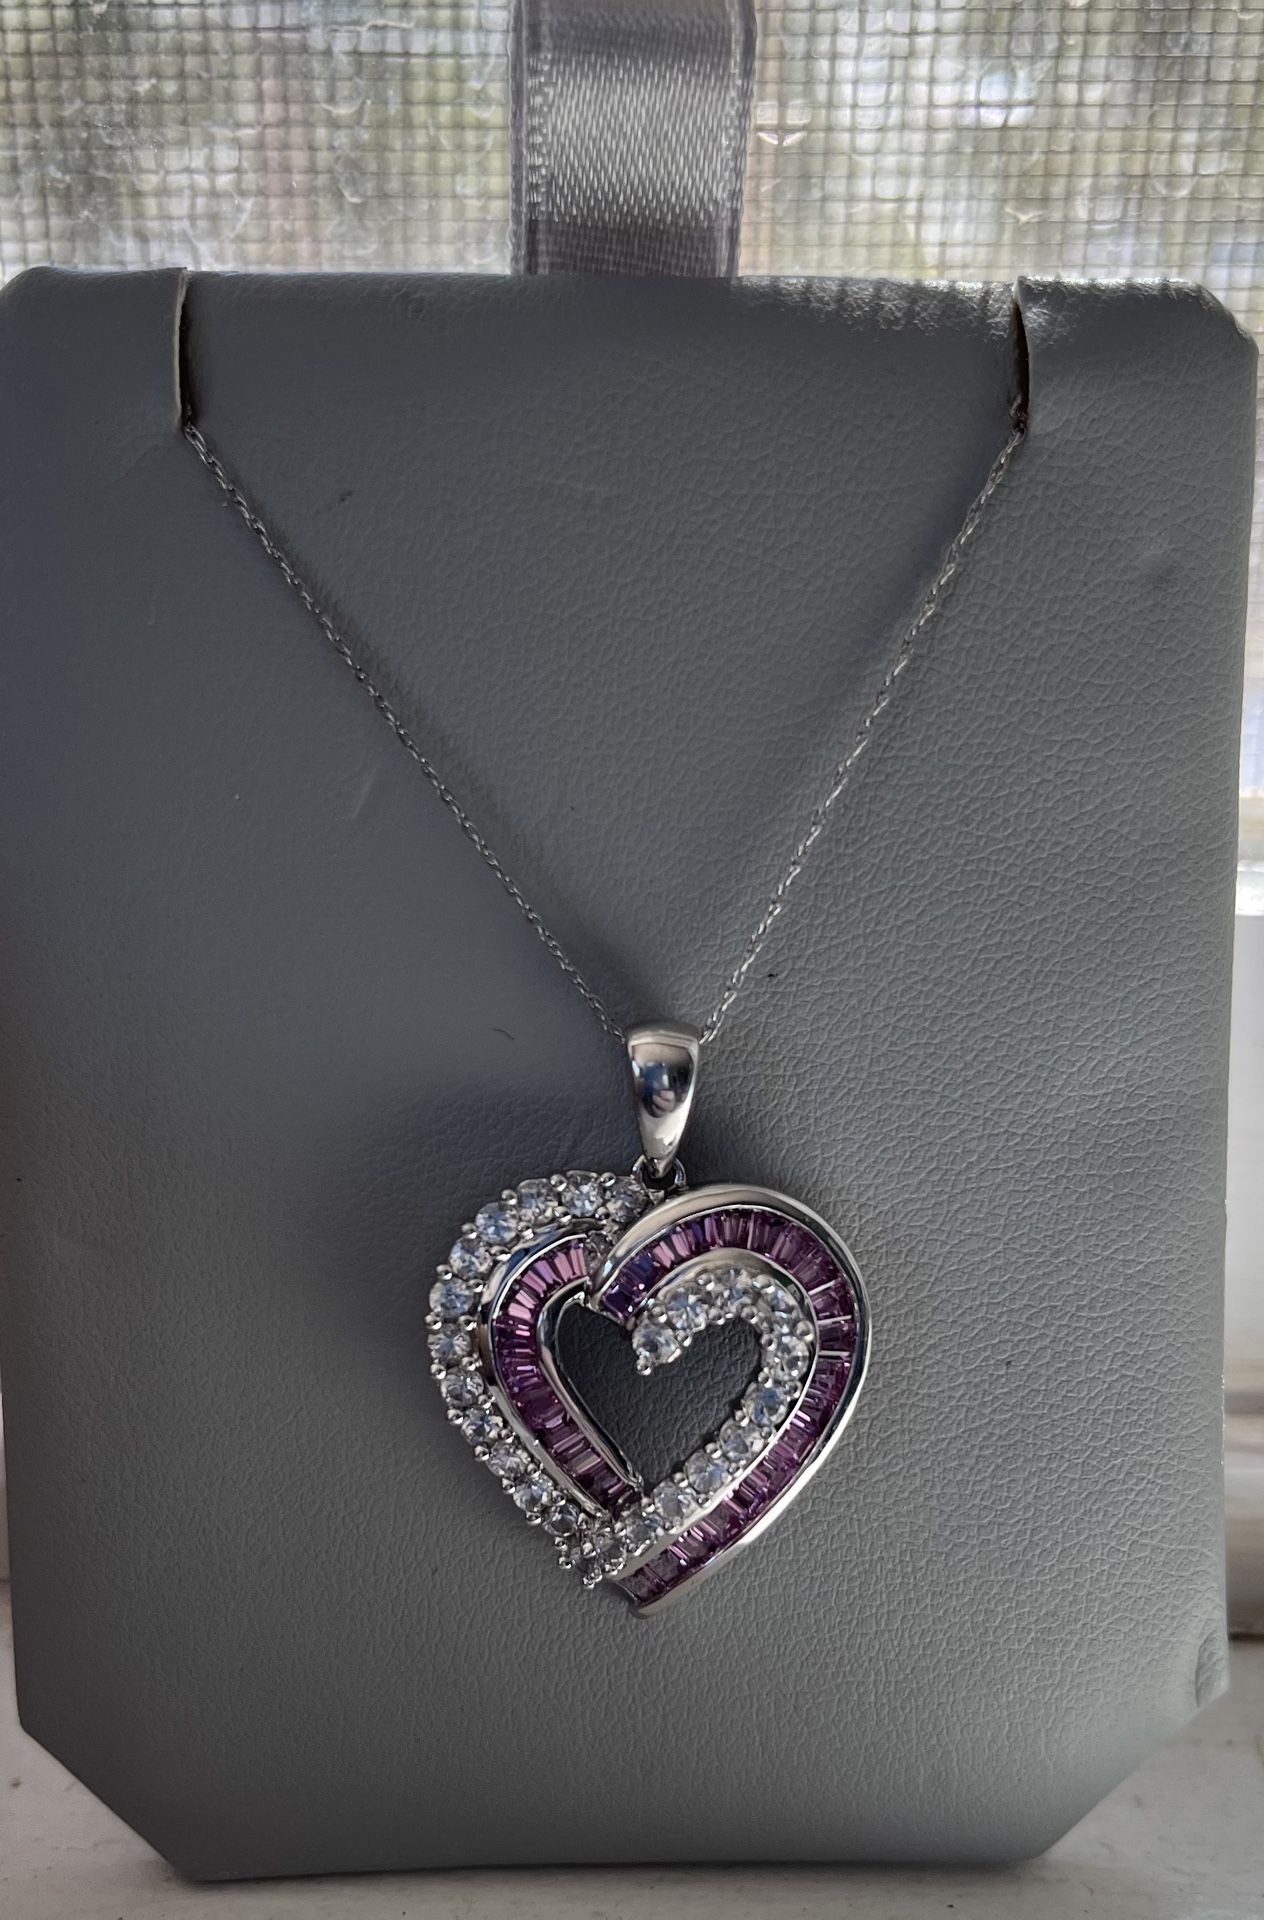 10KT White Gold Pink Ice and Diamond Pendant CZs. 10k White Gold Chain Included!